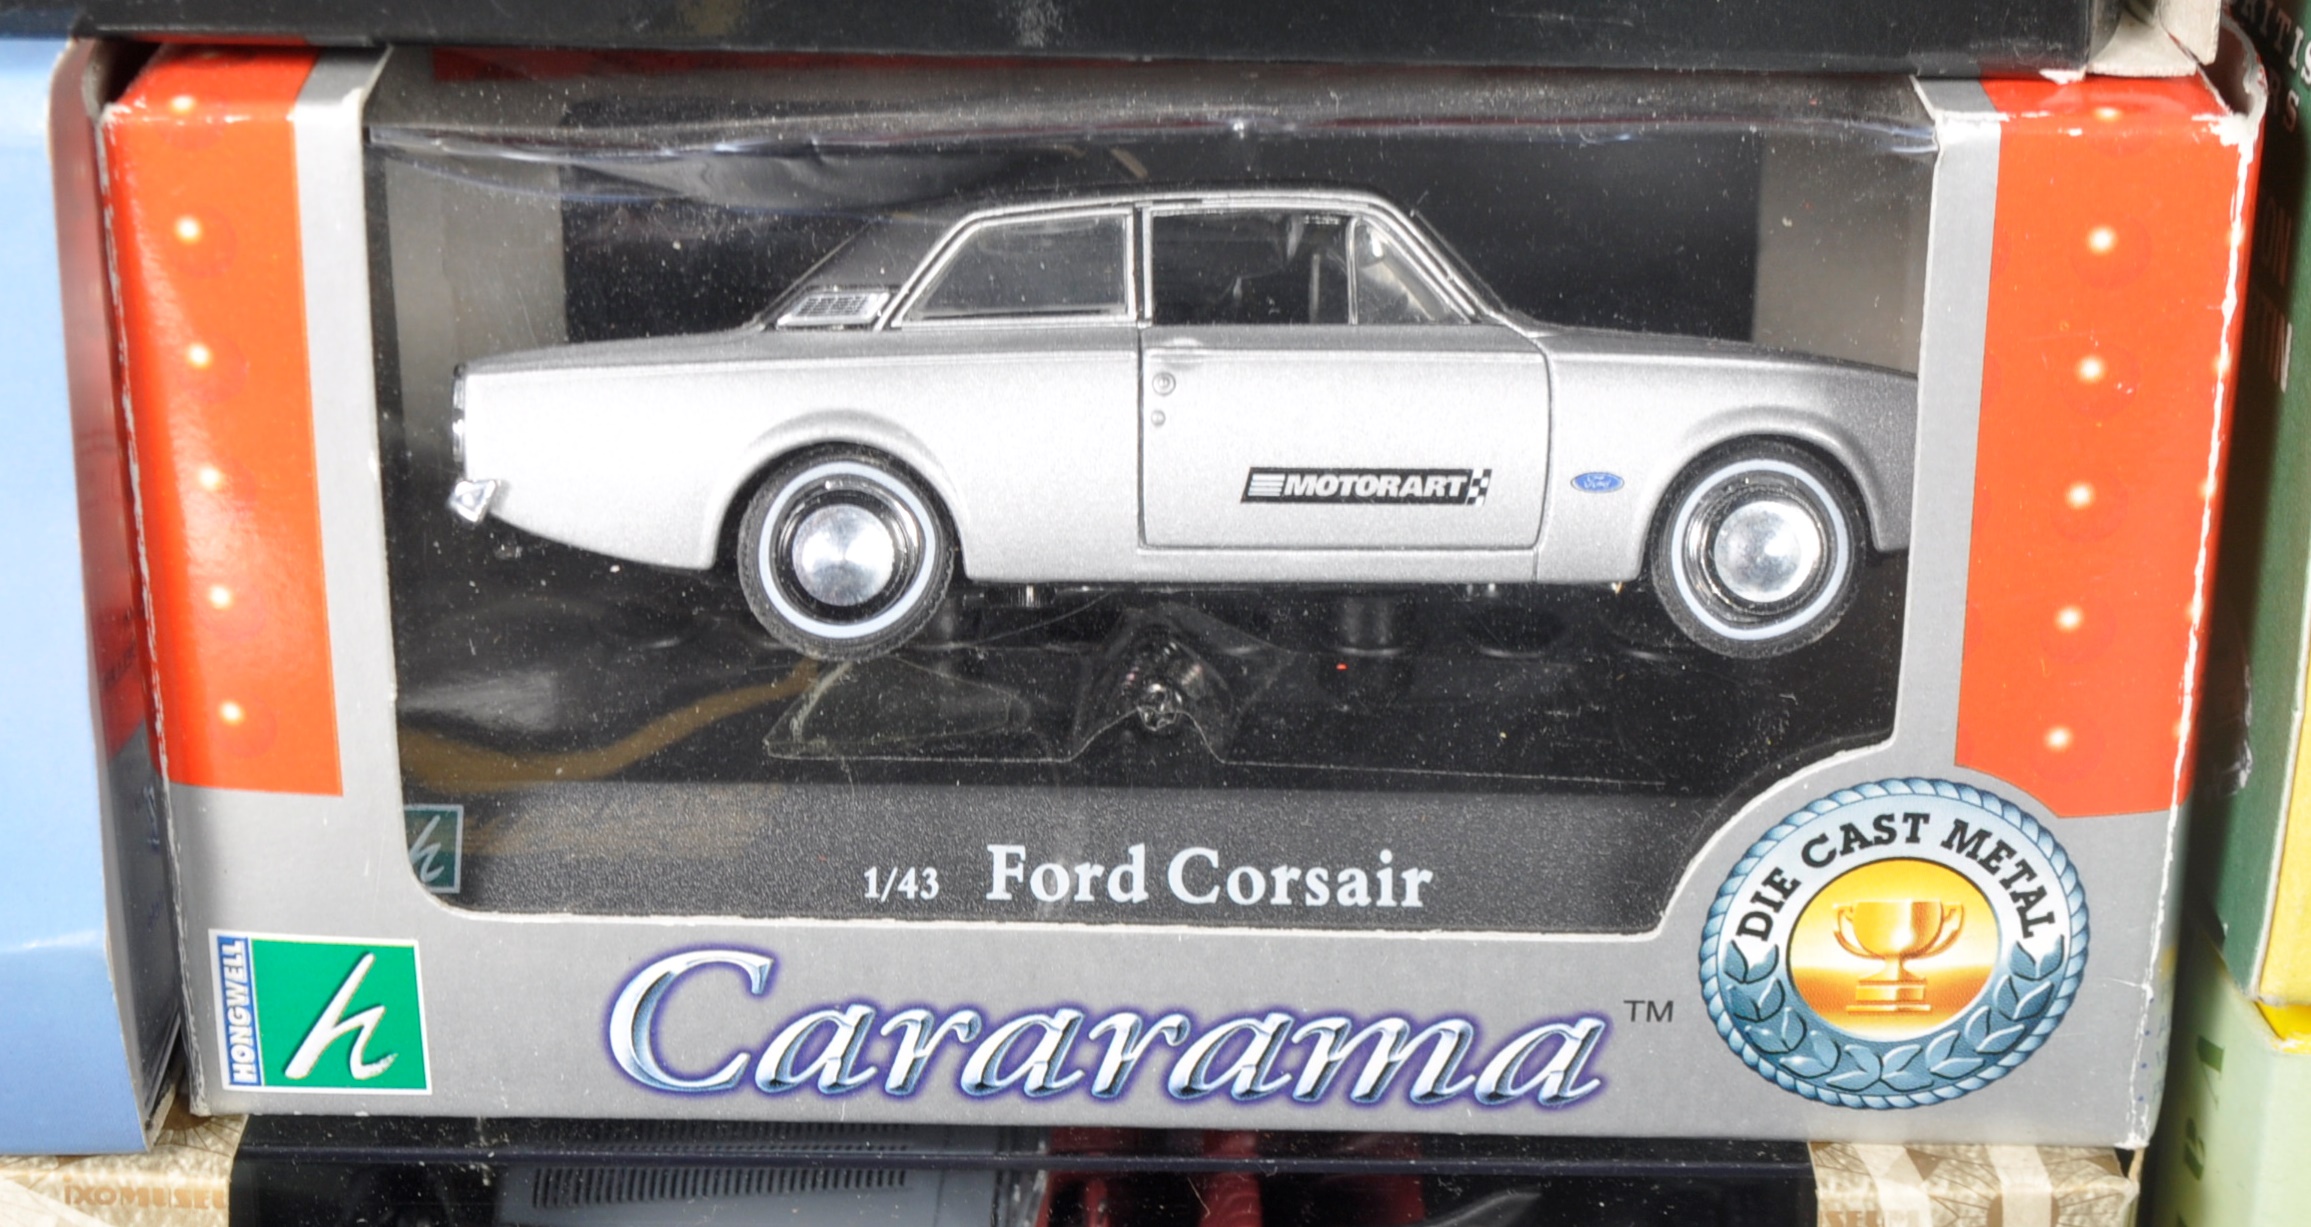 COLLECTION OF ASSORTED DIECAST MODEL CARS - Image 2 of 6